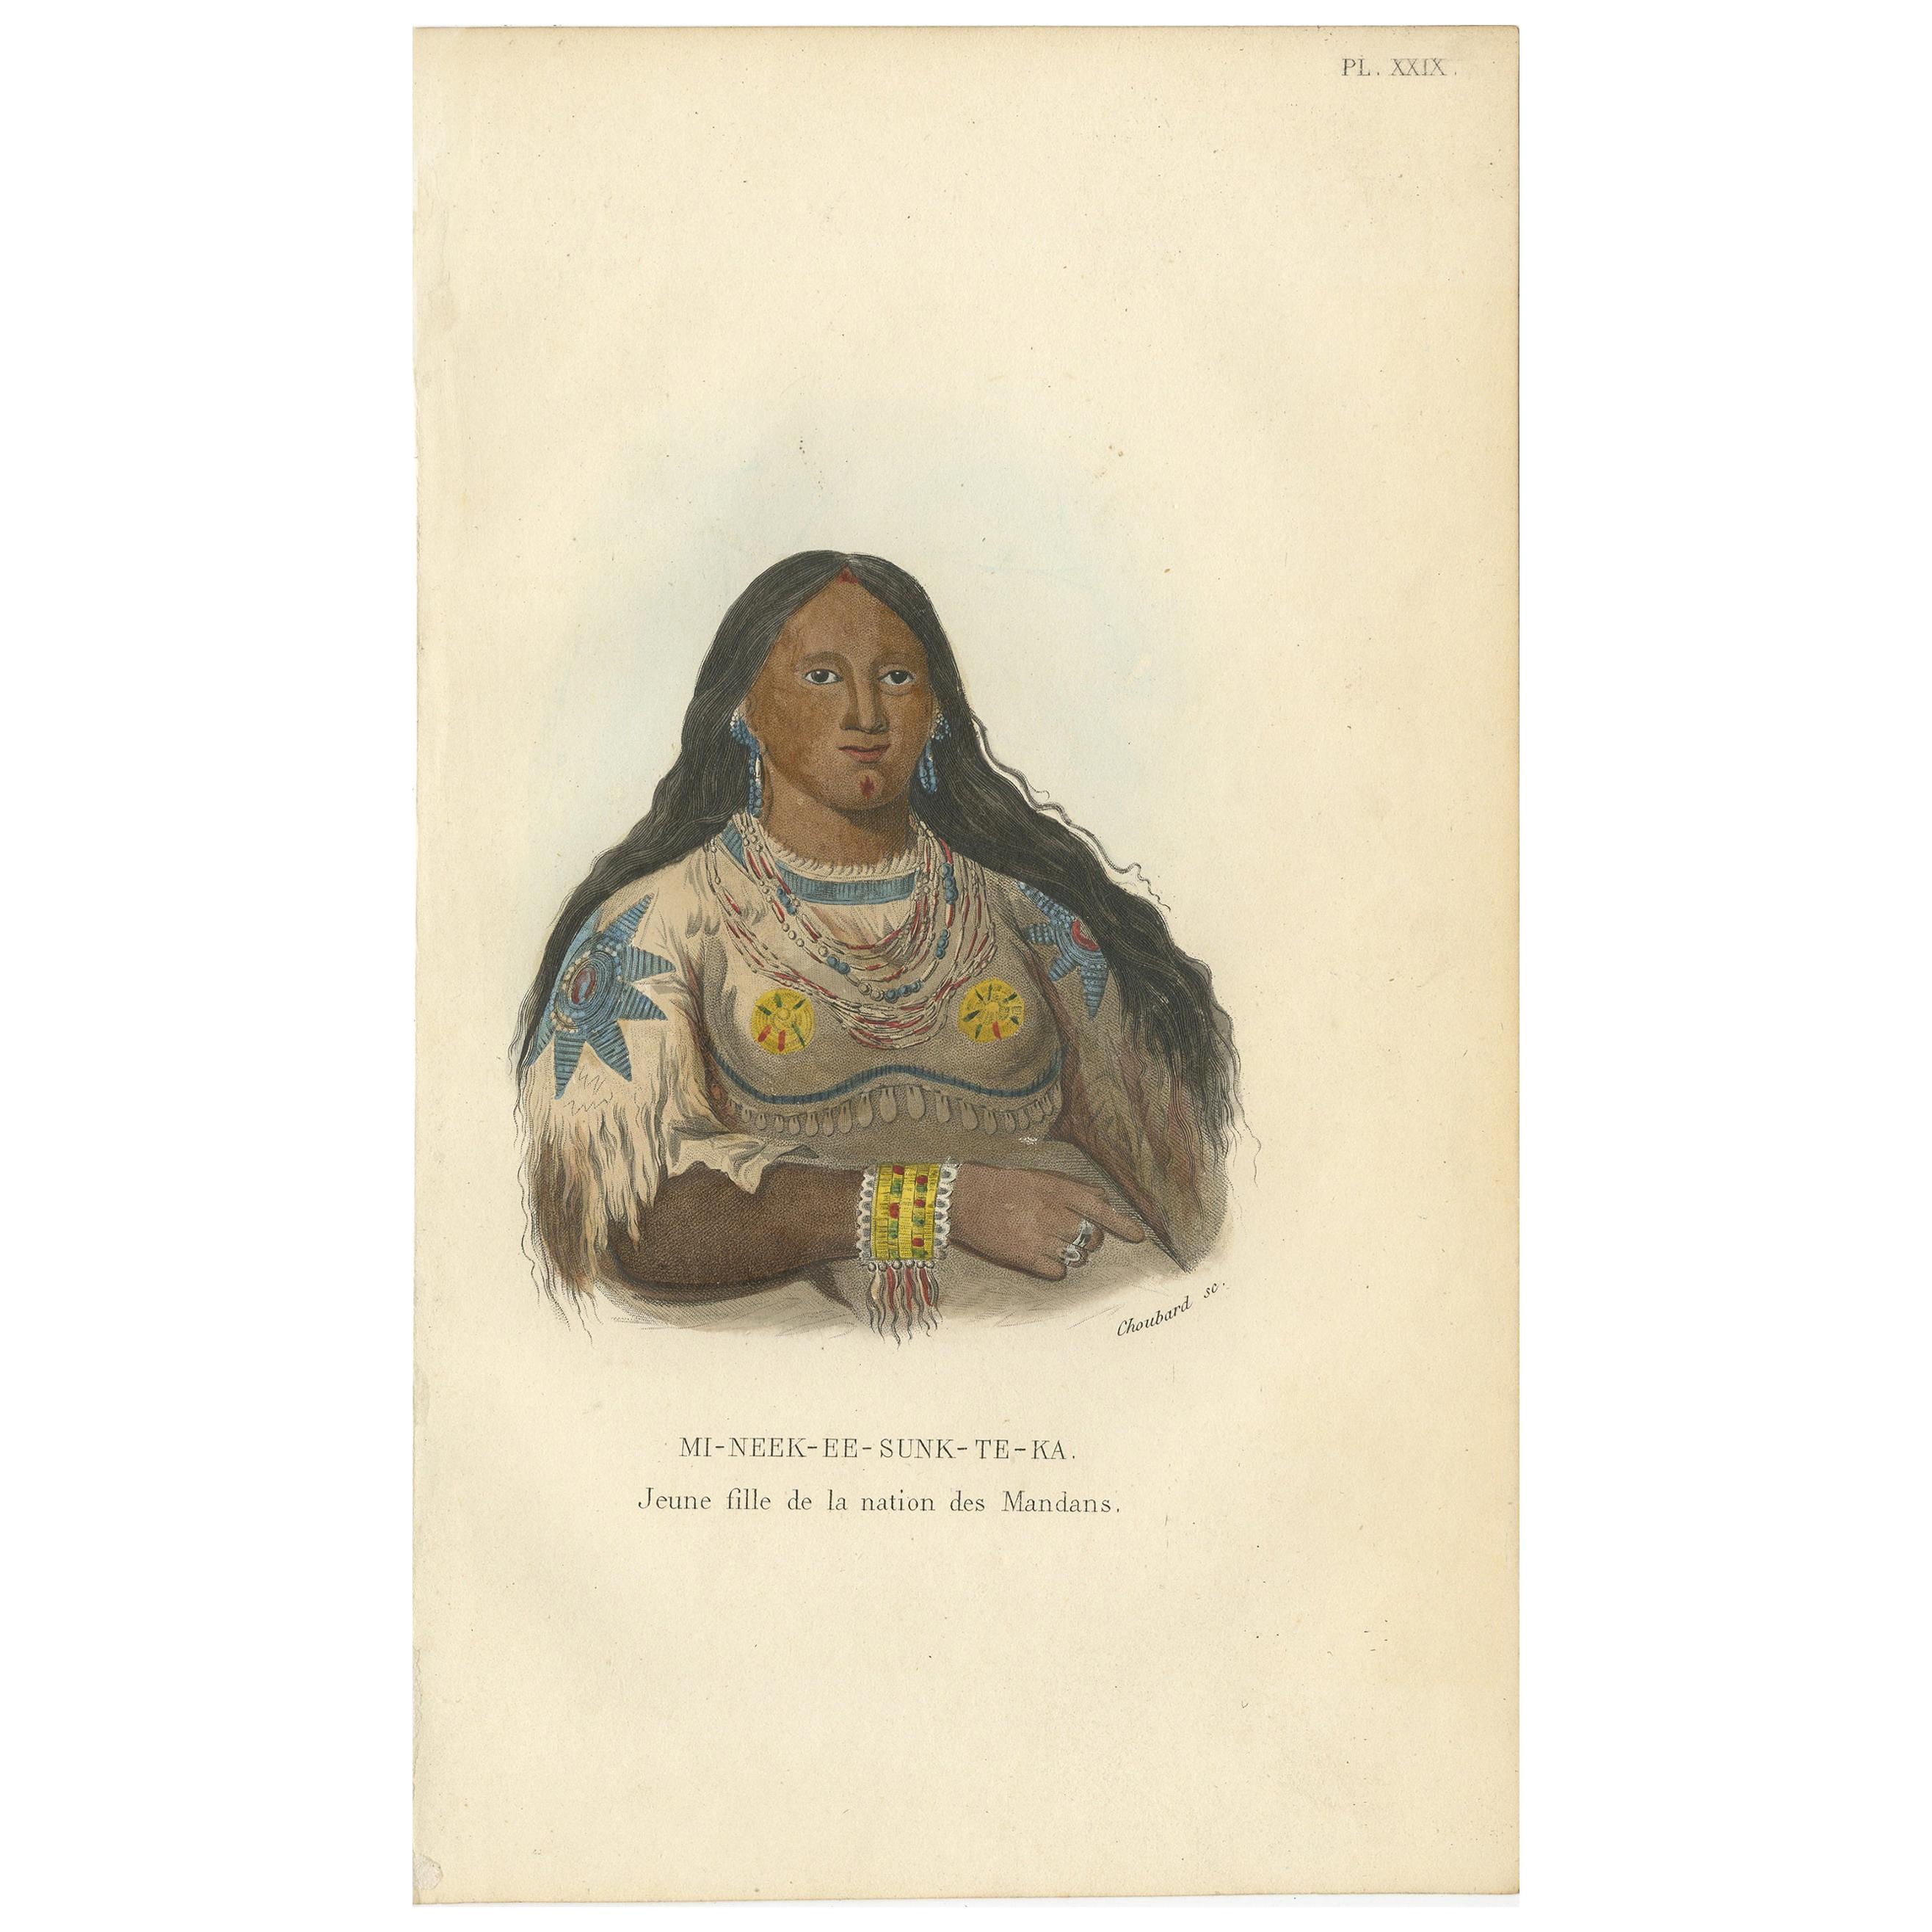 Antique Print of a Young Girl of the Mandan Tribe '1' by Prichard, 1843